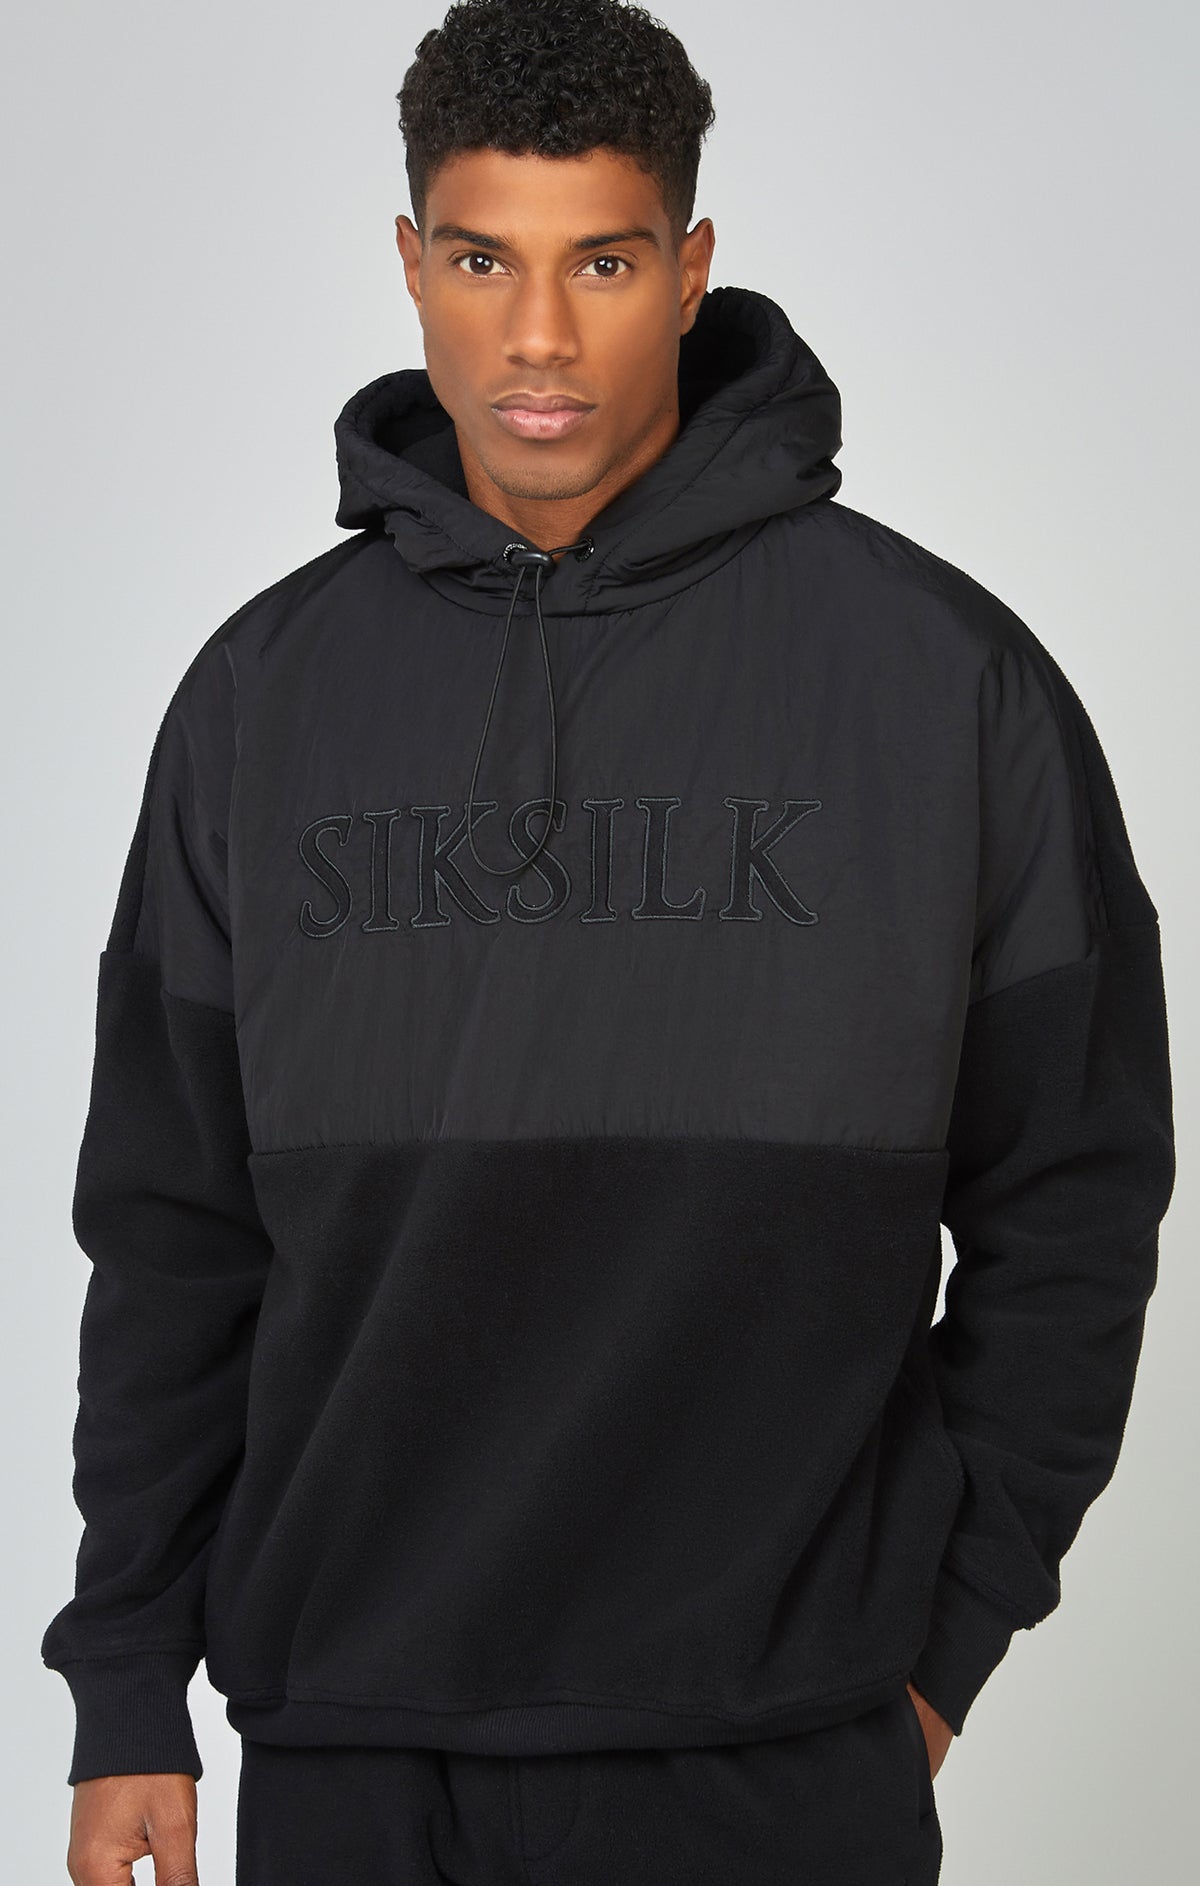 SikSilk - a Modern and Individual fashion brand online.